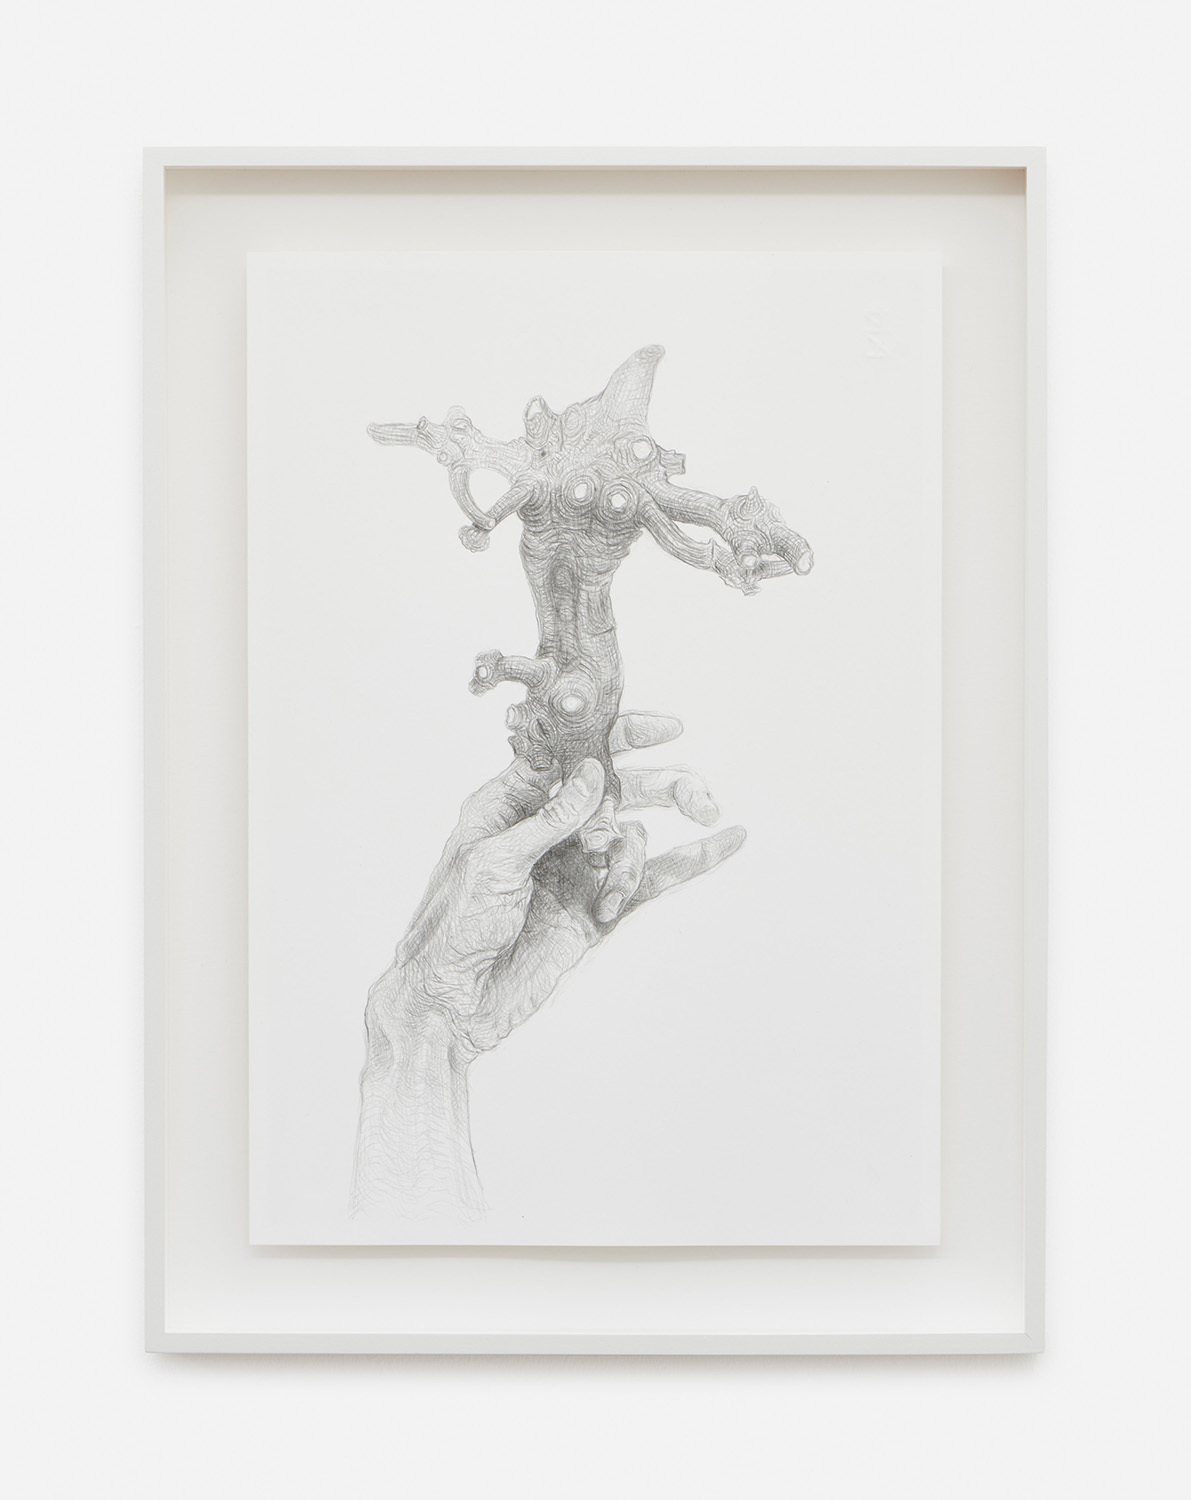 Beth Collar, “End Quote” III, 2020. Lytographic crayon on paper, framed: 58 x 43 cm